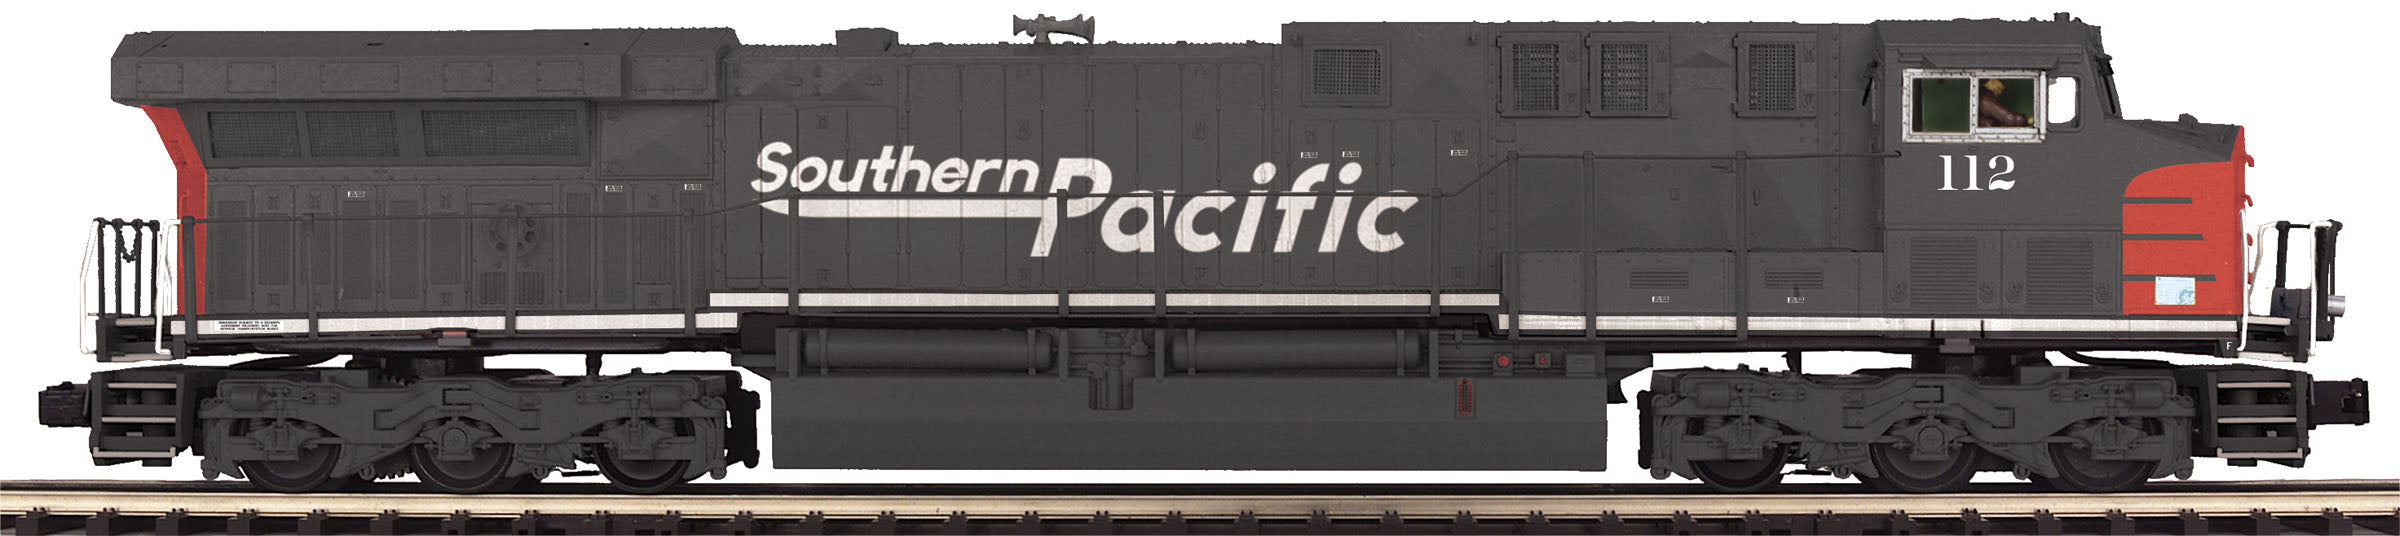 MTH 20-2187SP1-1 - AC6000 Diesel Engine "Southern Pacific" #136 w/ PS3 - Custom Run for MrMuffin'sTrains